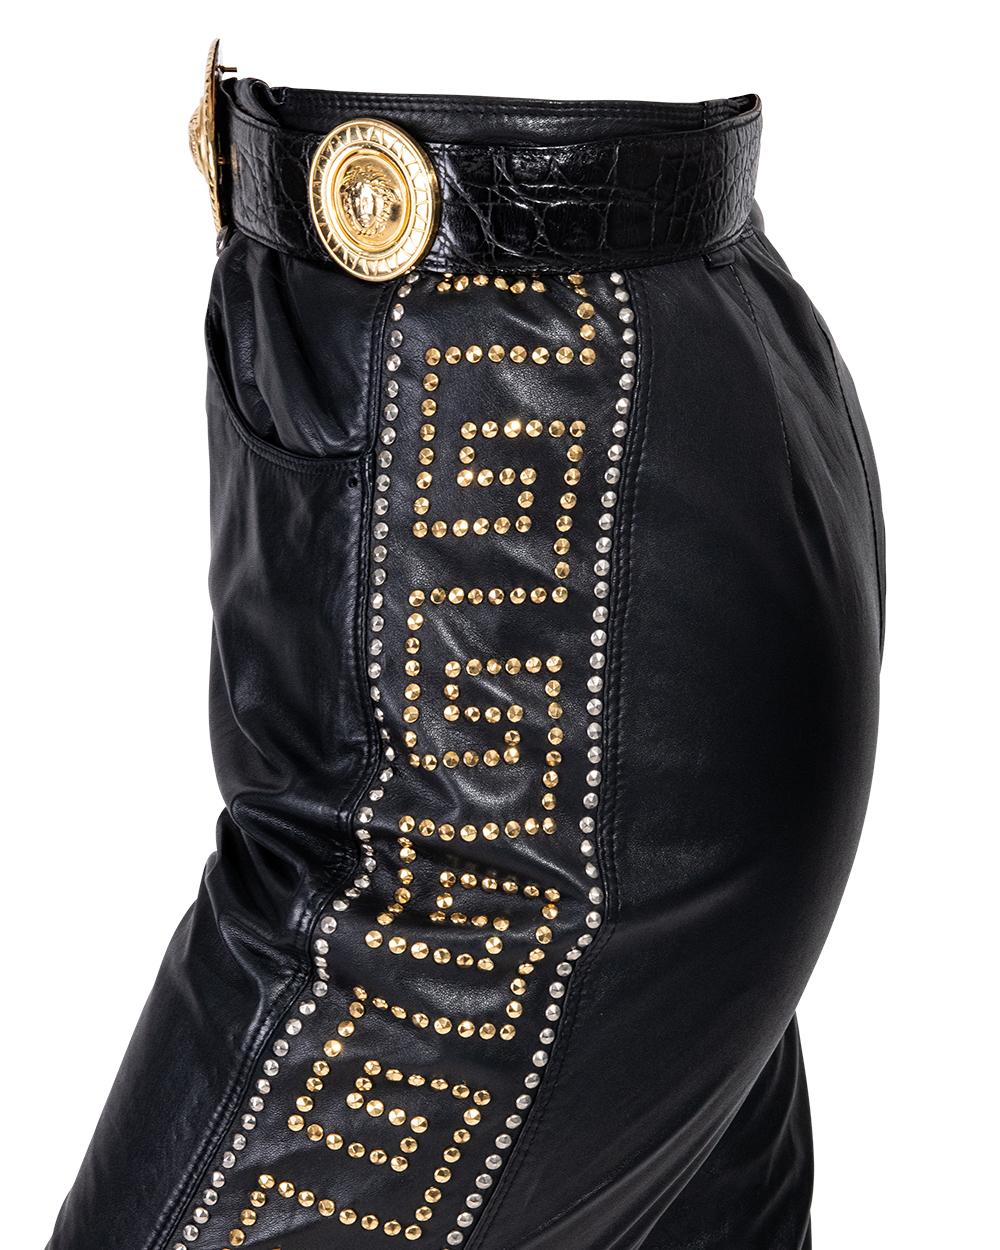 A/W 1992 Gianni Versace Leather Vest, Pant and Belt Set with Gold Stud Details 3